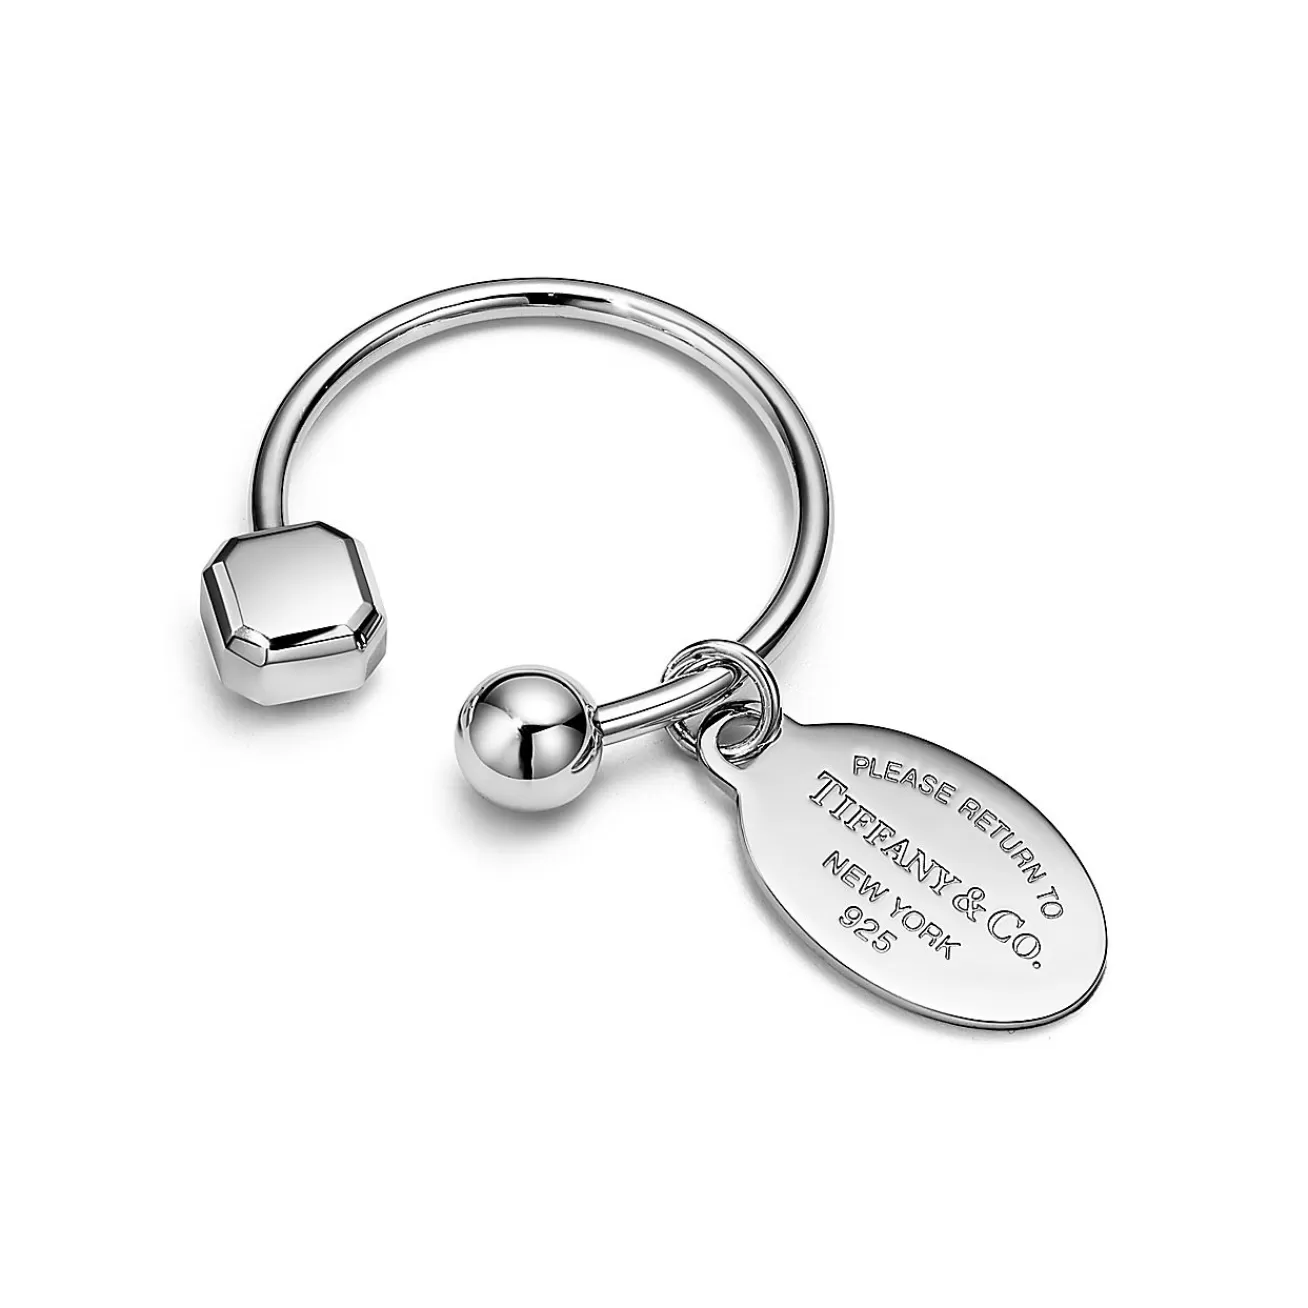 Tiffany & Co. Return to Tiffany® Oval Tag Screwball Key Ring in Sterling Silver | ^Women Business Gifts | Key Rings